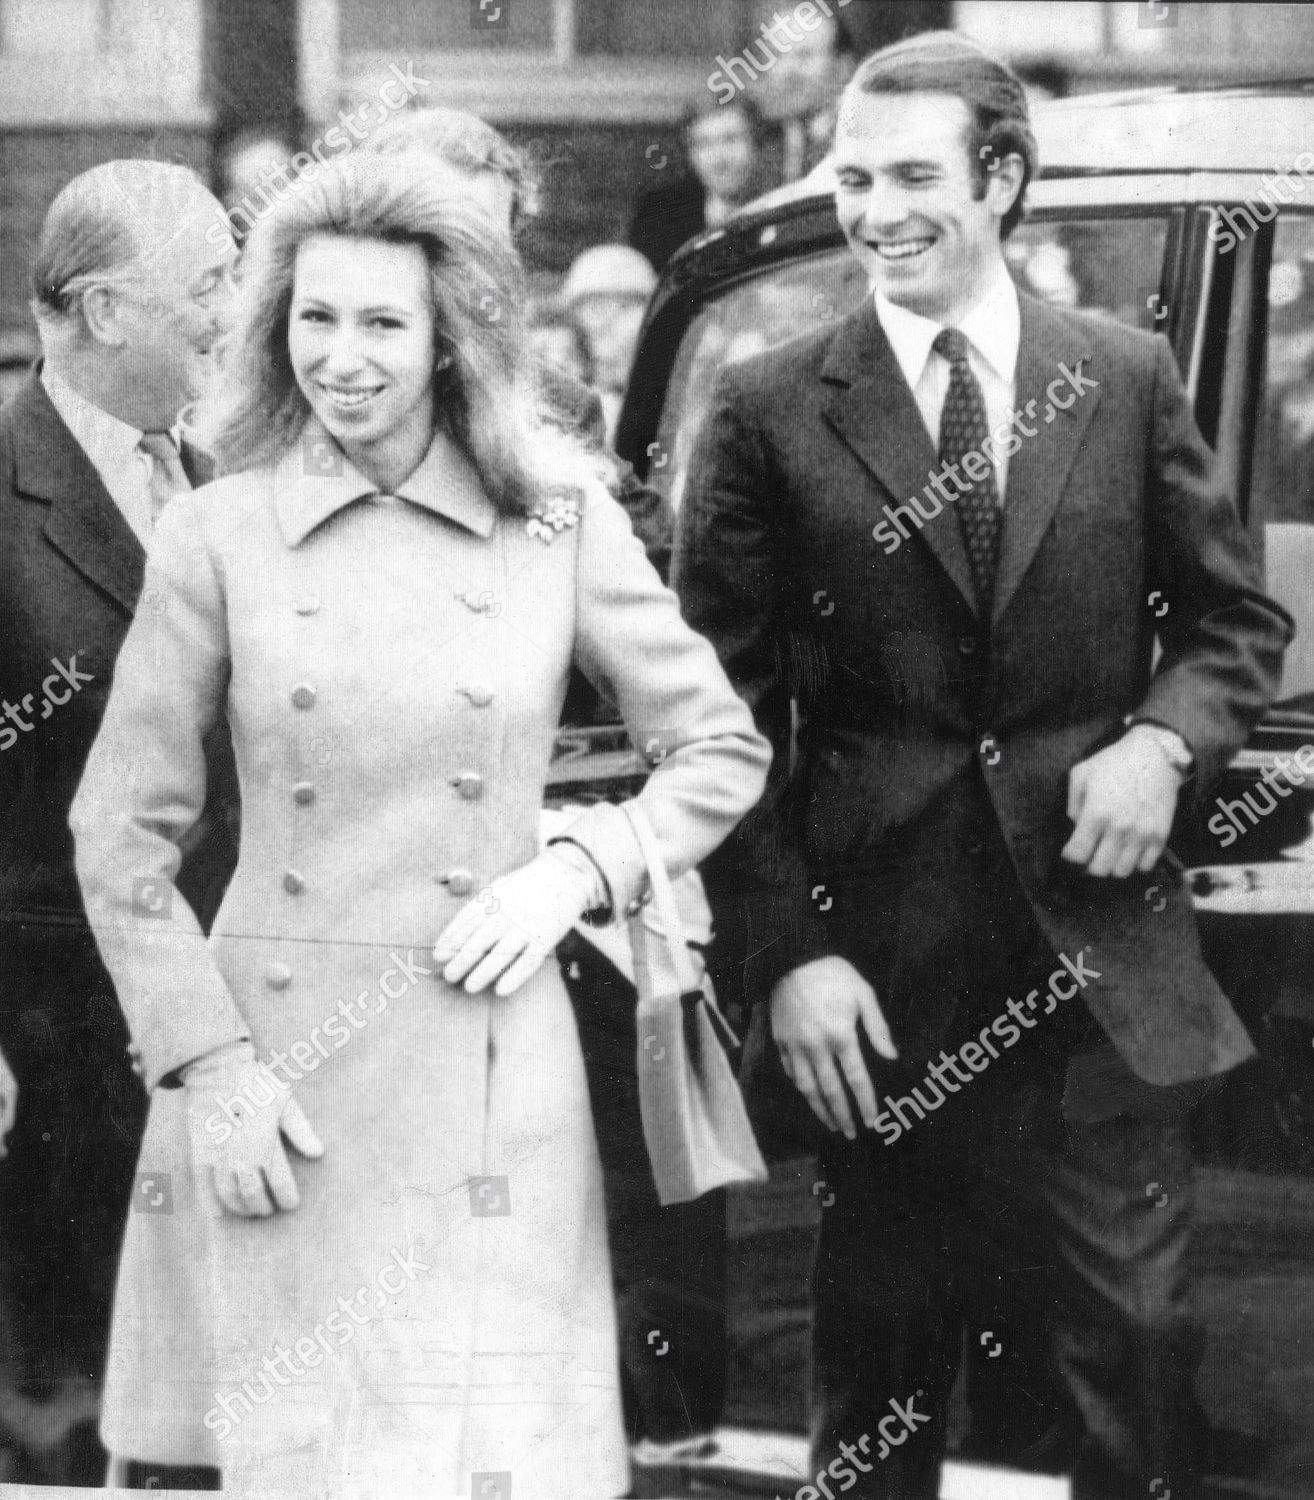 princess-anne-now-princess-royal-and-captain-mark-phillips-wedding-honeymoon-november-december-1973-15-11-73-princess-anne-and-captain-mark-phillips-arrive-at-london-airport-to-start-their-holiday-in-the-sun-royalty-shutterstock-editorial-892332a.jpg